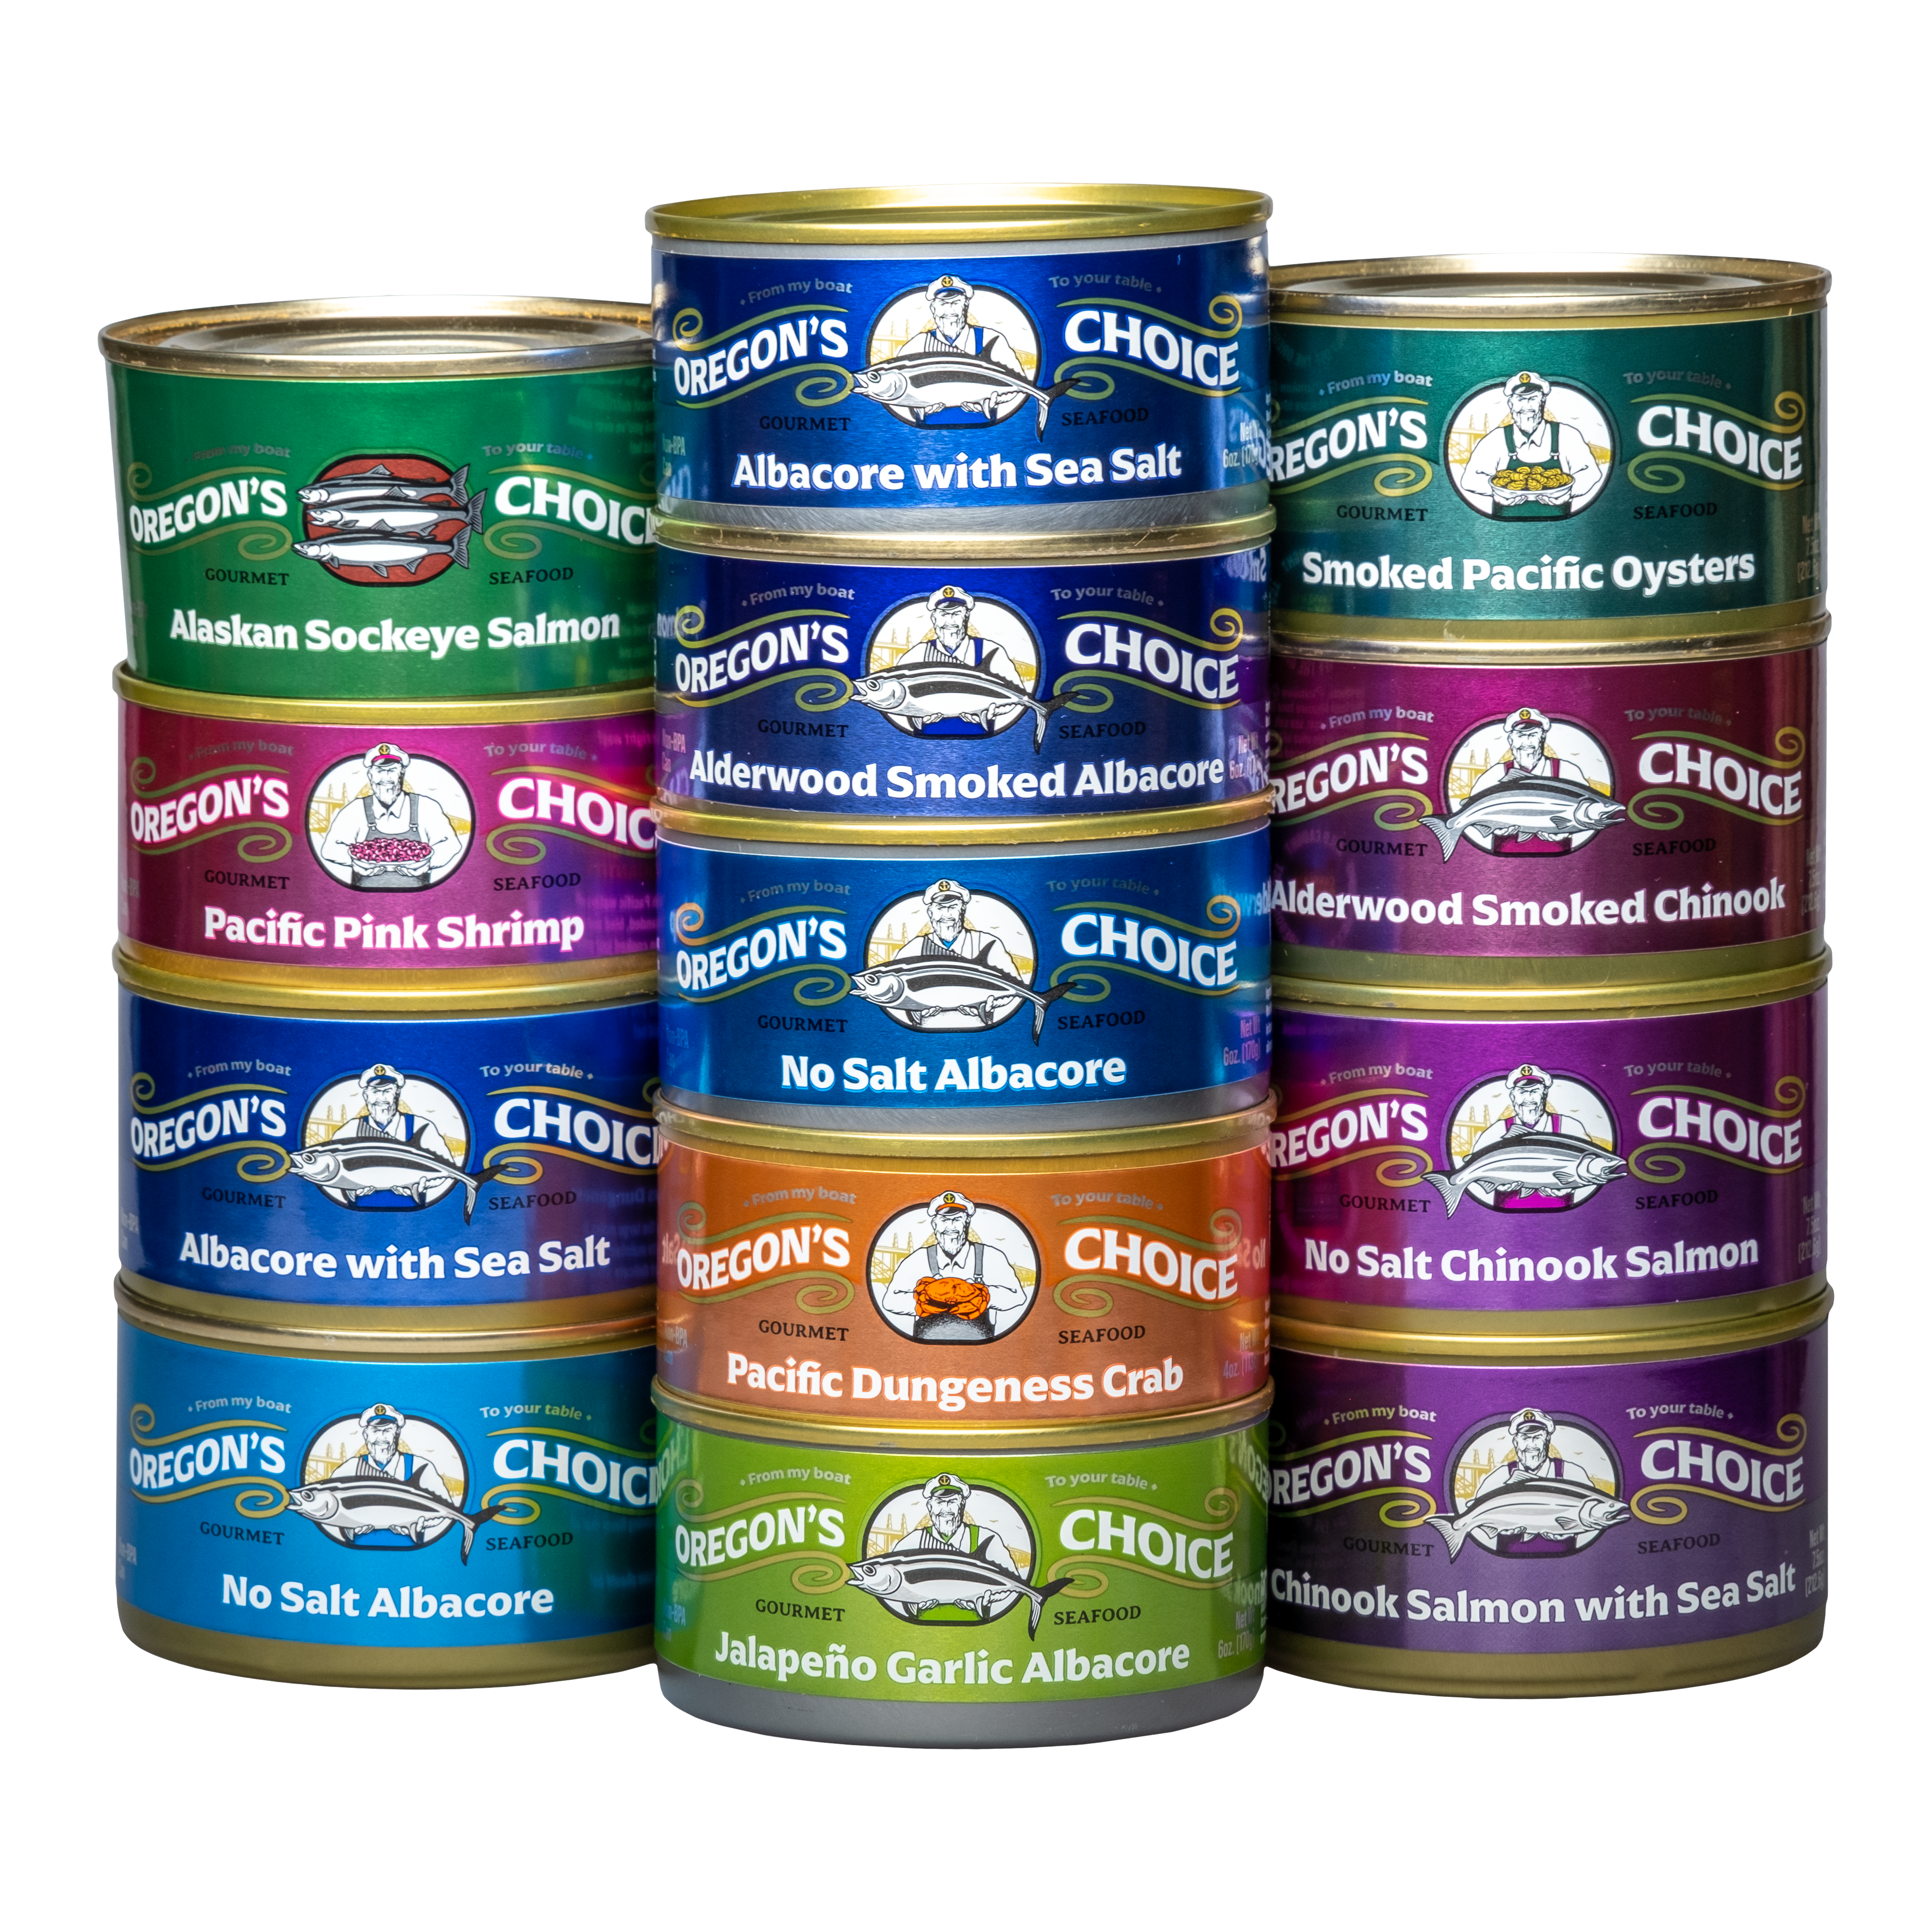 Try any one of our full line of fresh caught, fresh canned seafood products